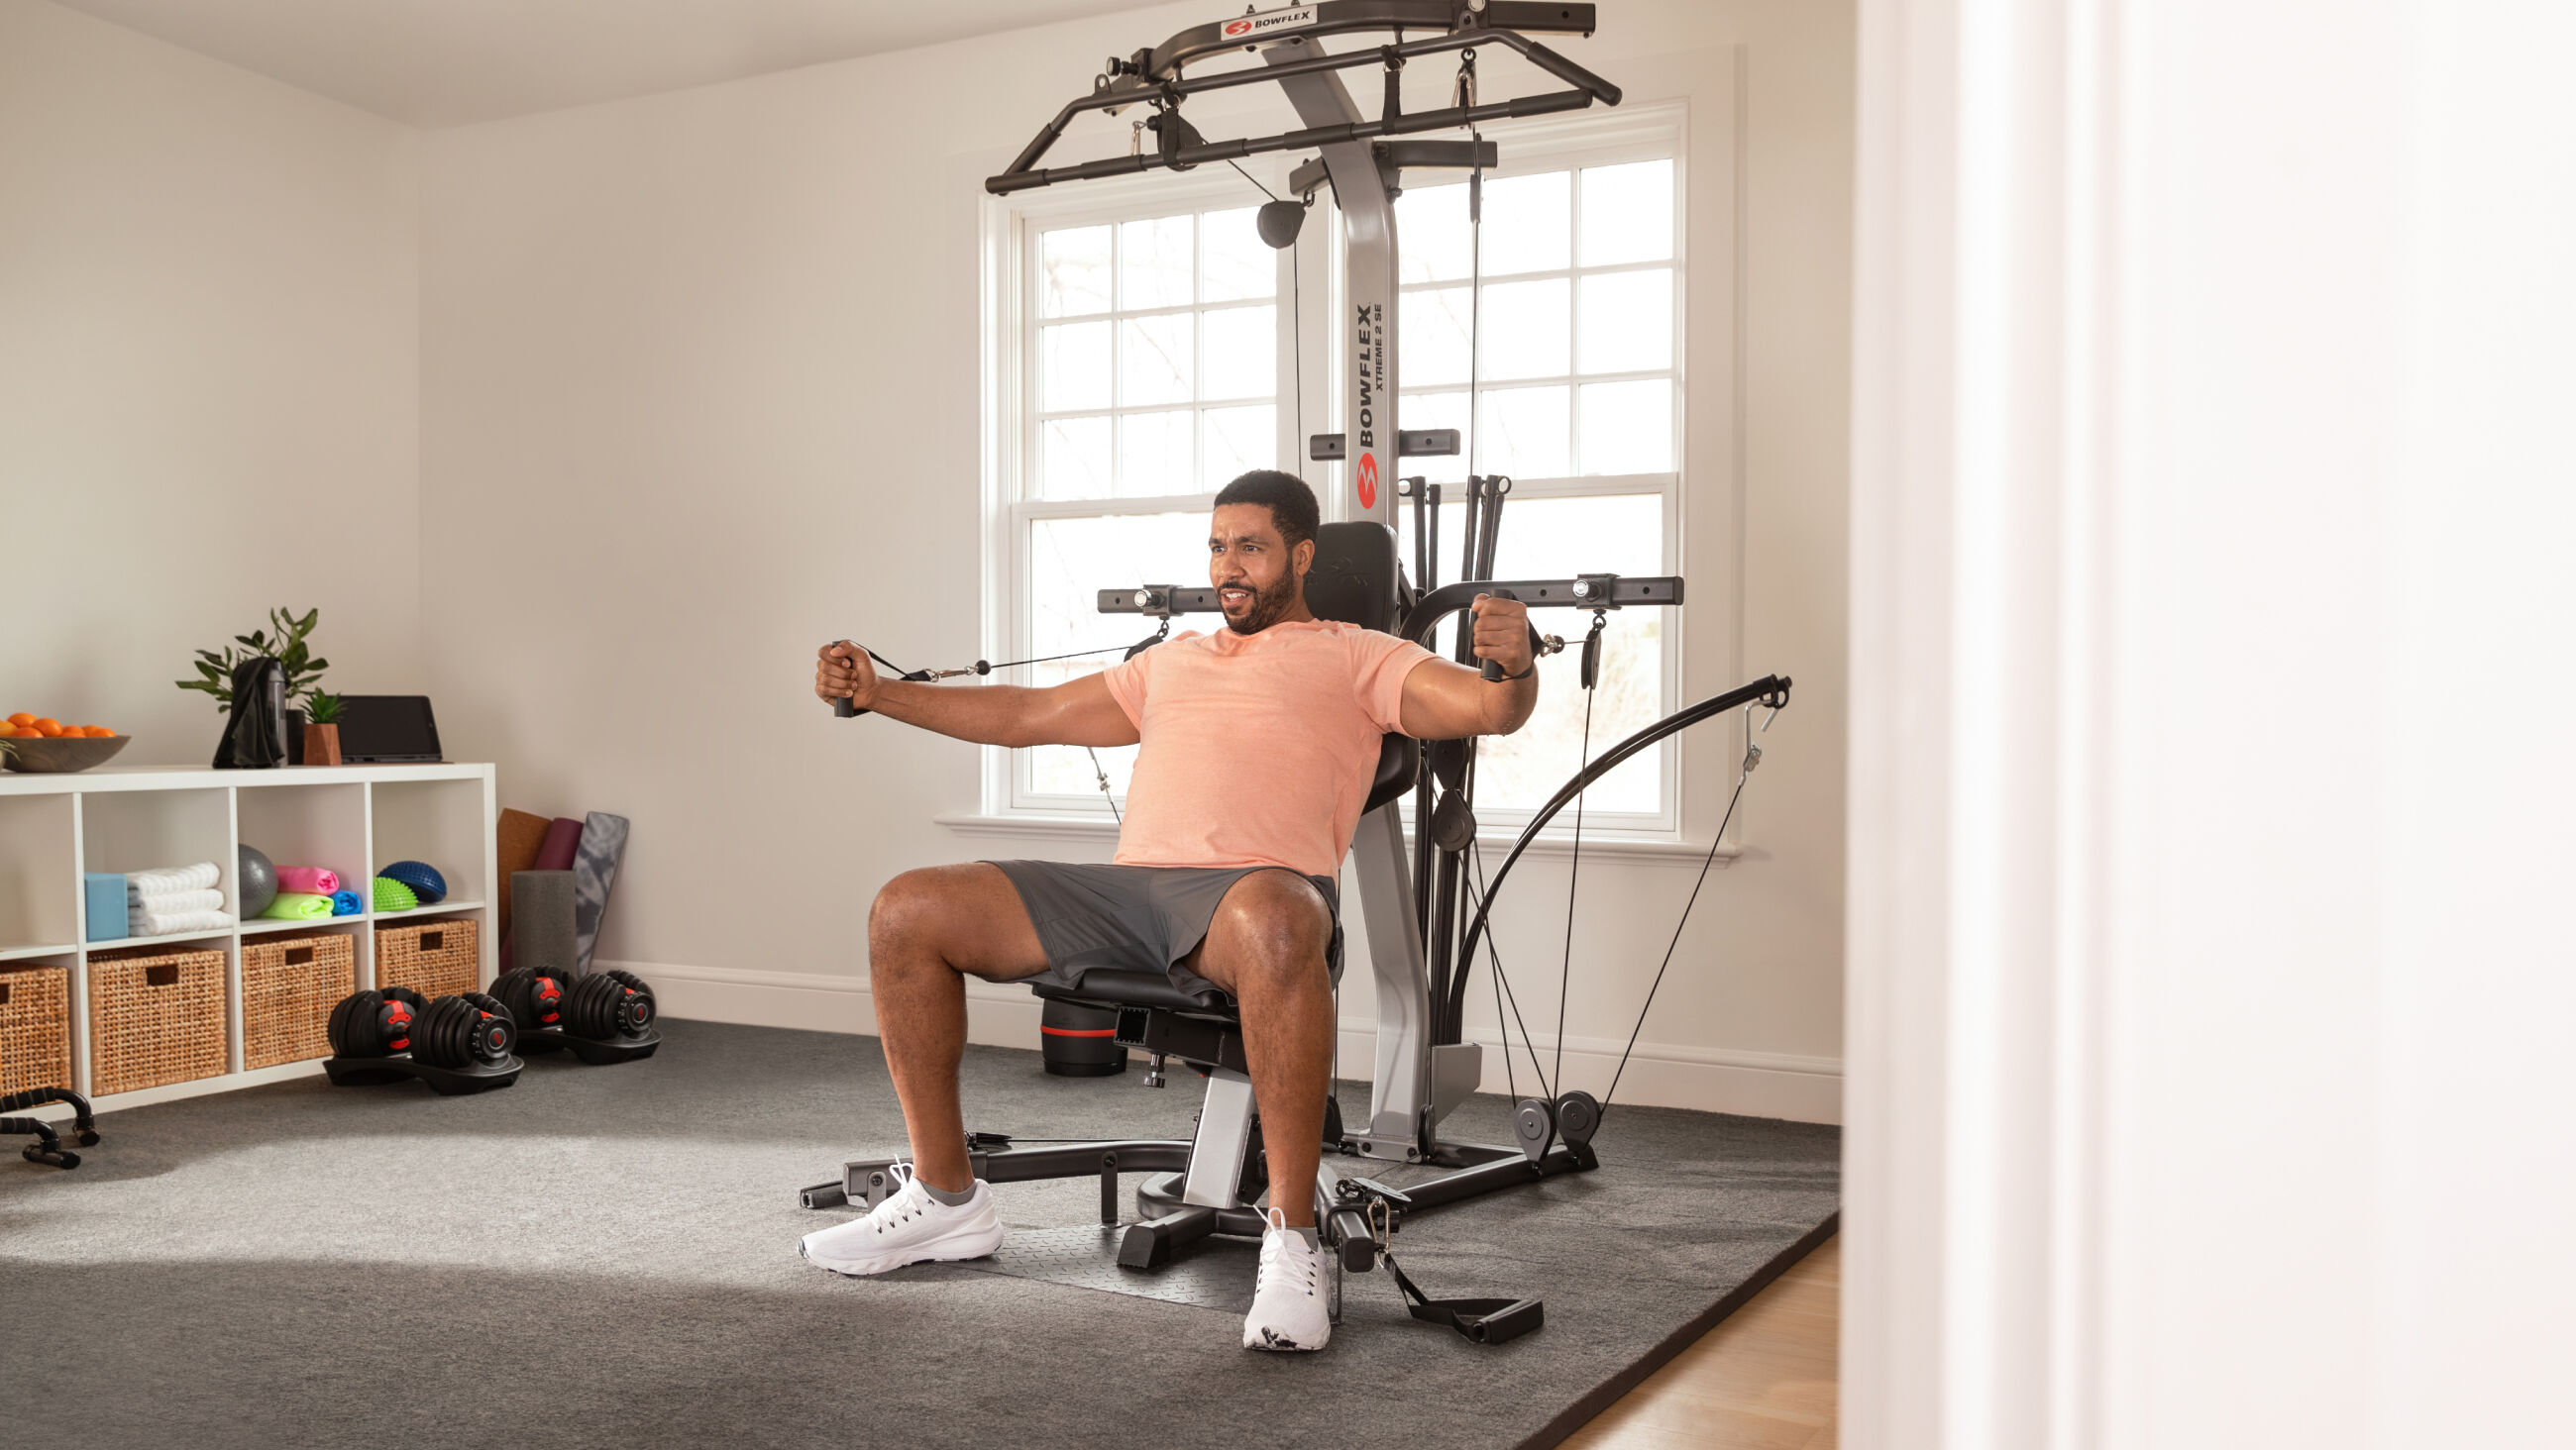 The All-In-One Home Gym That Can Replace 11 Items of Gym Equipment